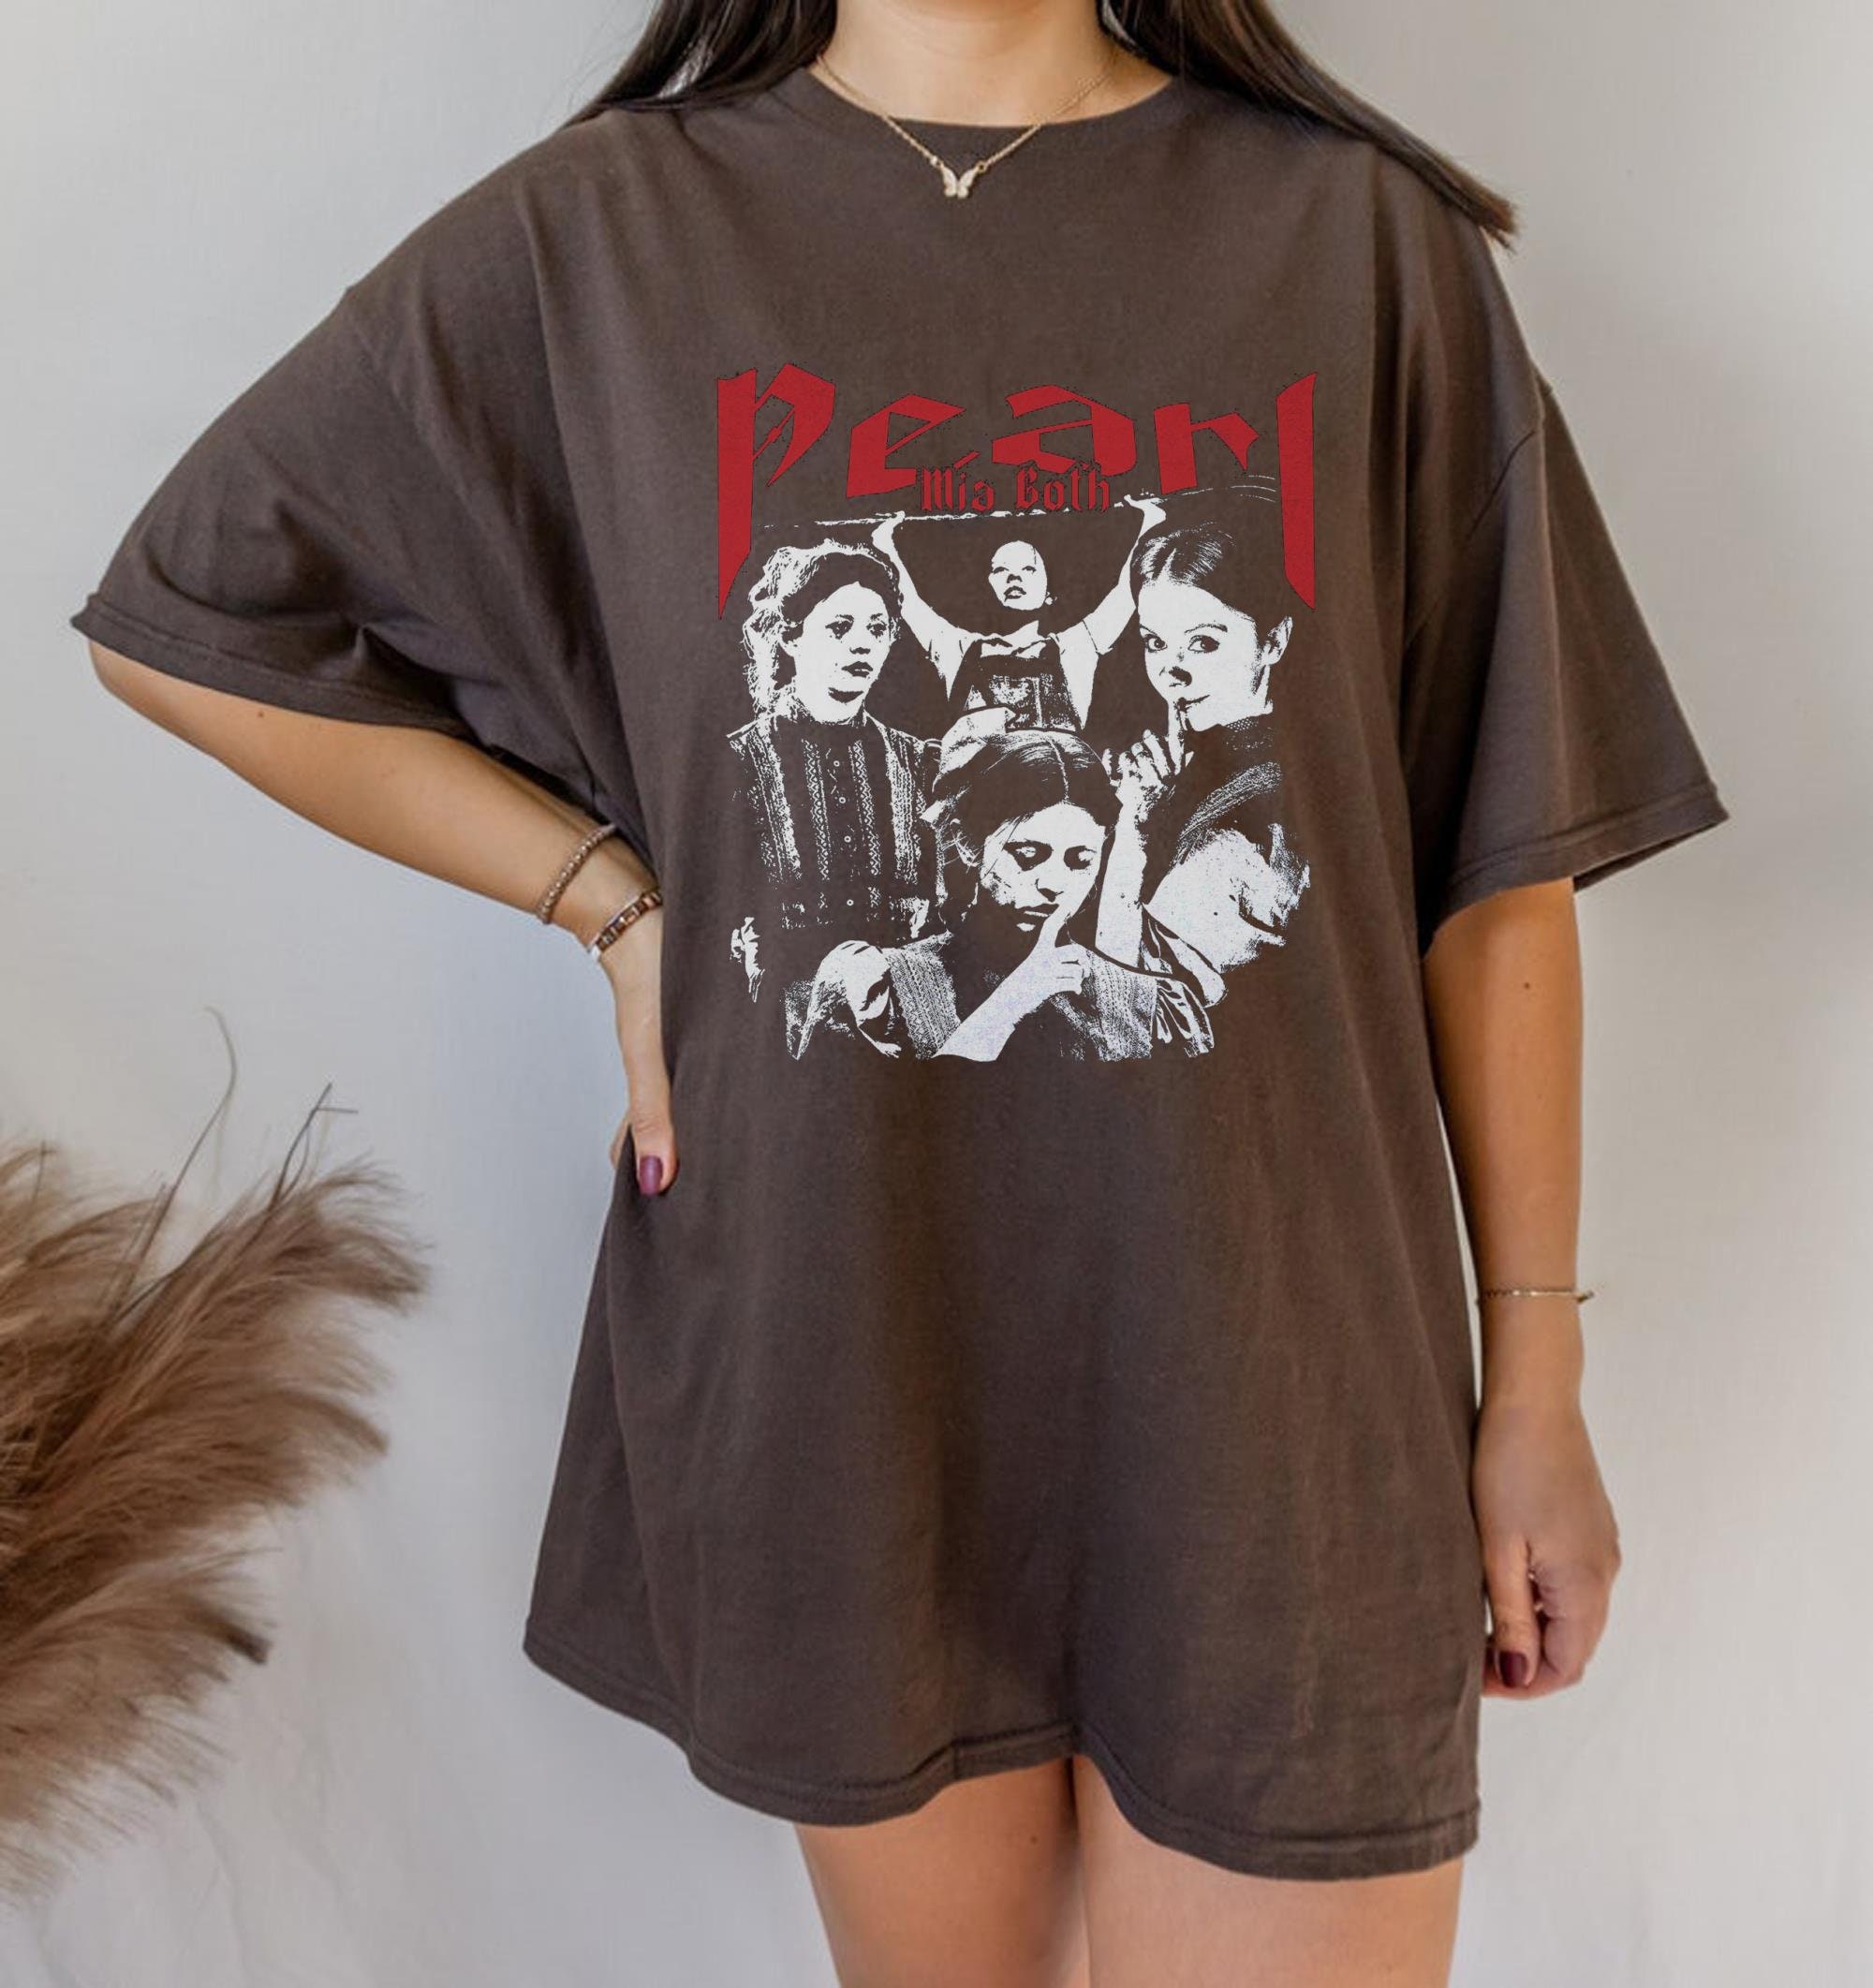 Discover Pearl Horror movie Inspired Tee, Mia Goth Scary movies Shirt